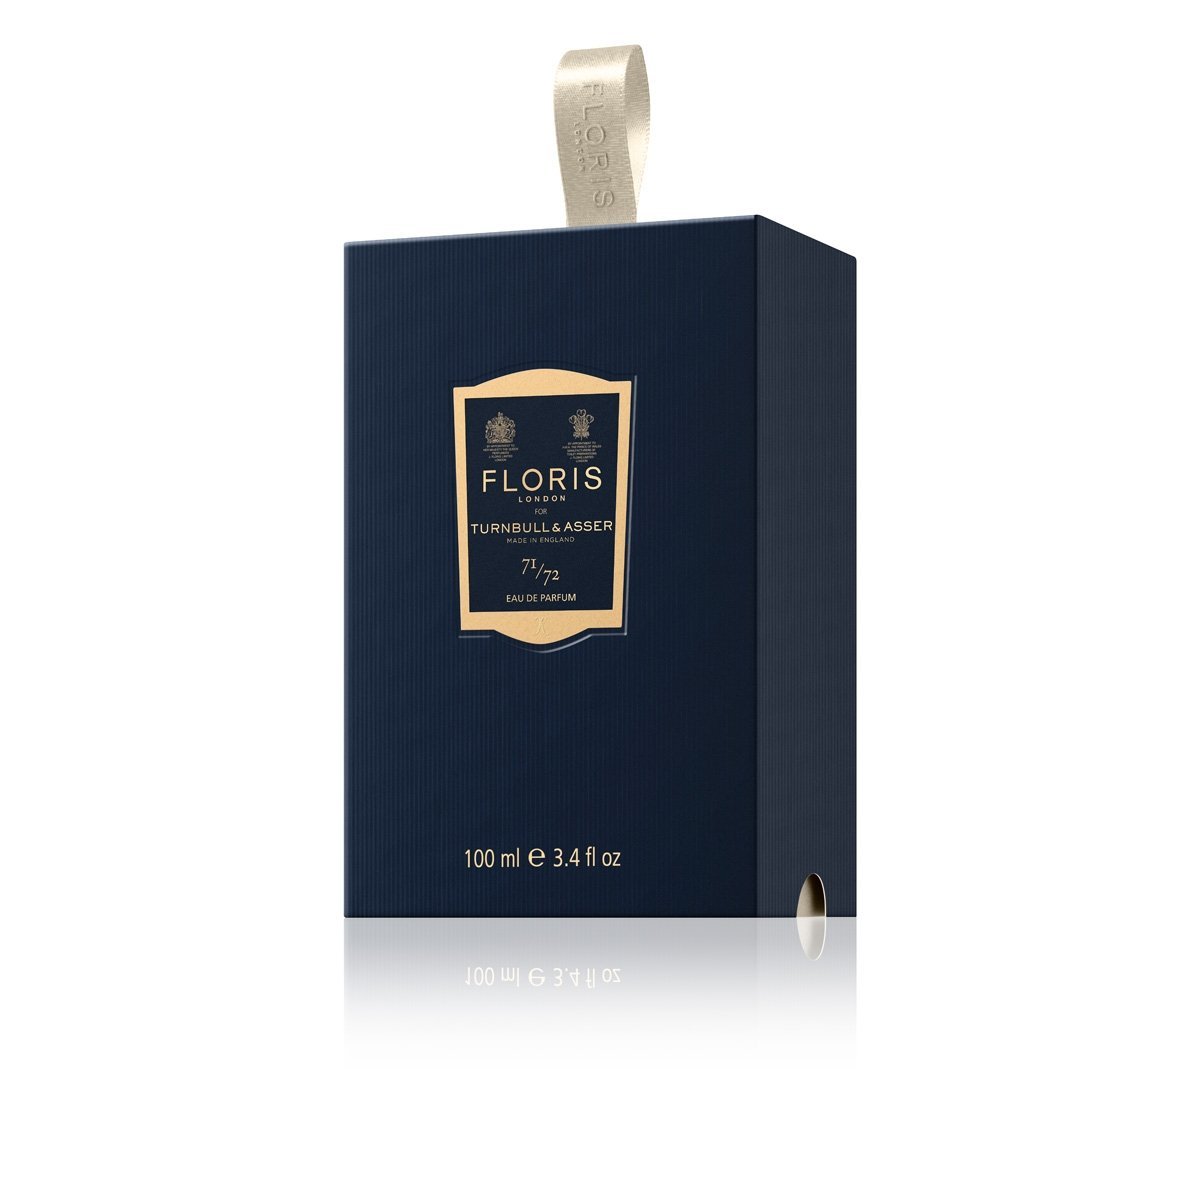 A blue box with a gold label containing FLORIS Turnbull & Asser 71/72 EDP 100 ML fragrance from KirbyAllison.com.